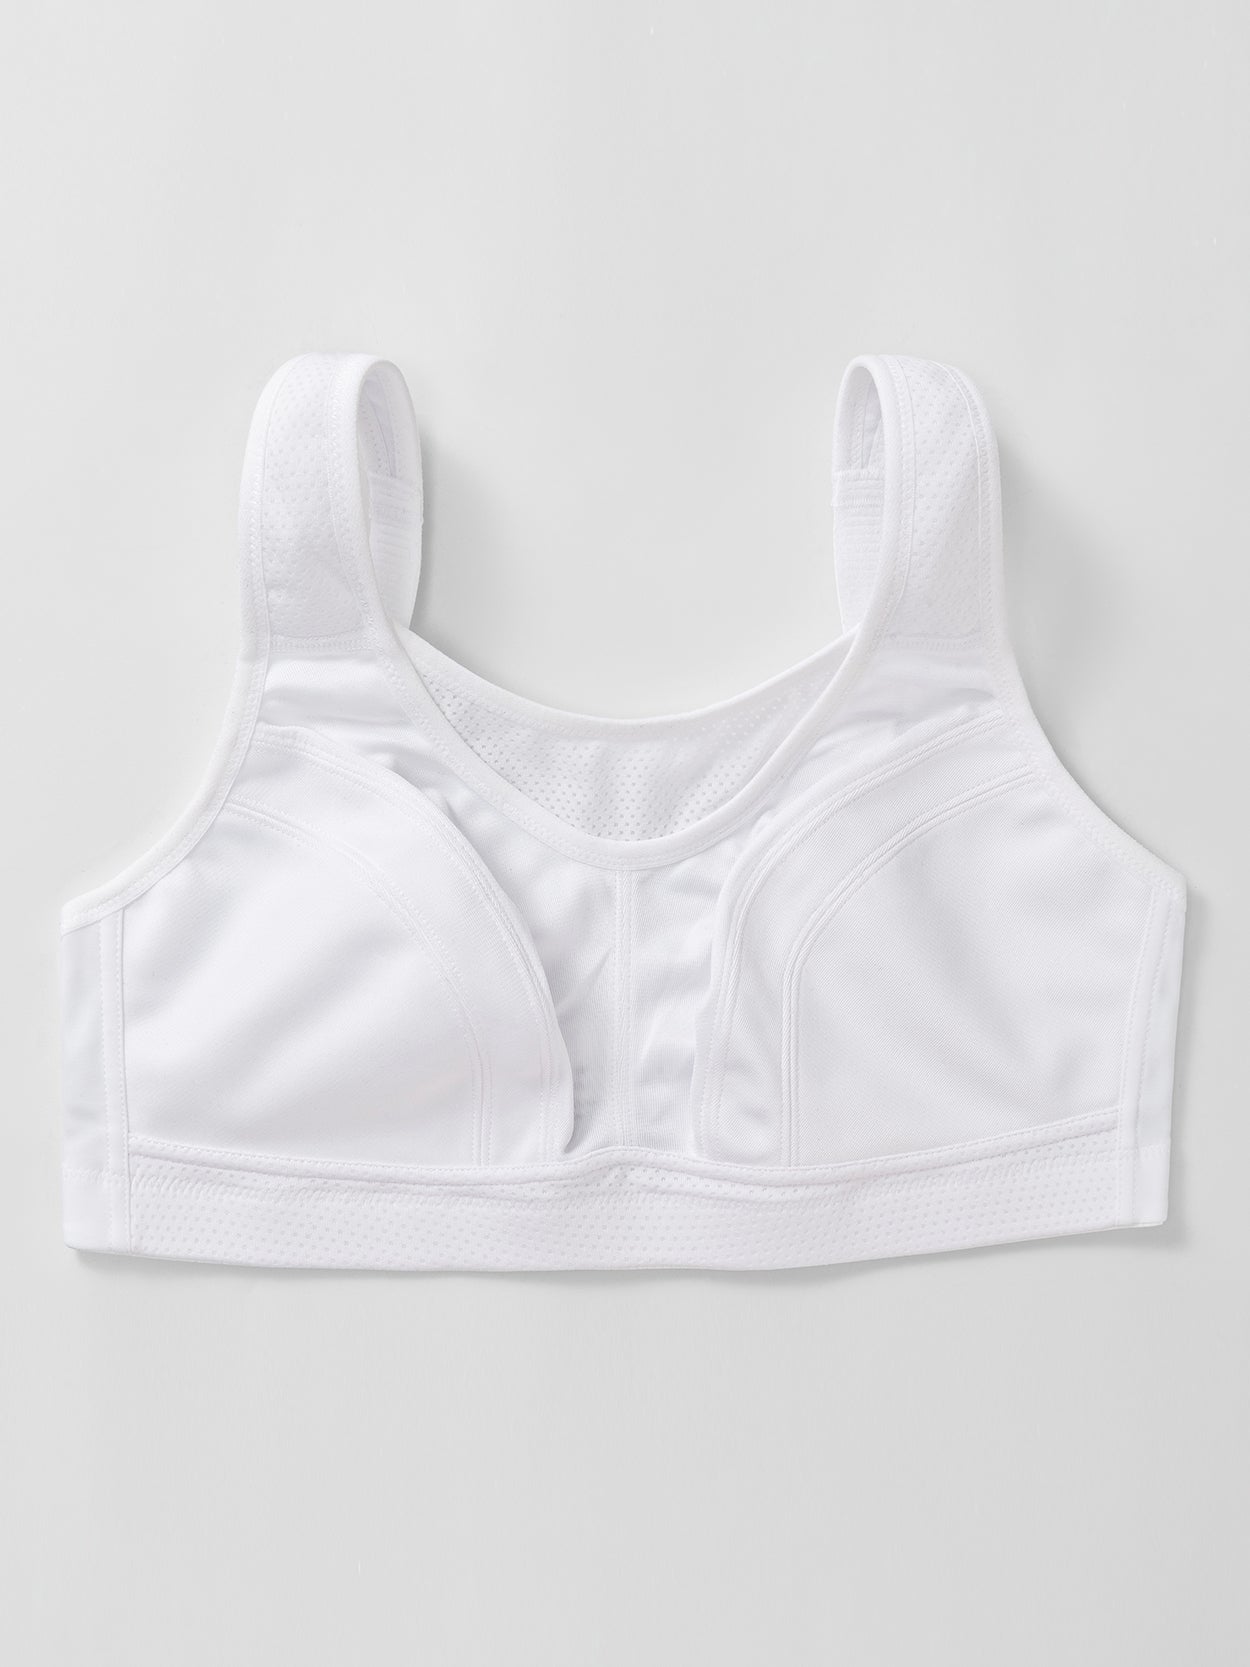  Sport Bras Women High Impact Non Padded with Underwire ，High  Support Sports Bra Sportswear Crop Top (Color : White, Size : 34D) :  Clothing, Shoes & Jewelry